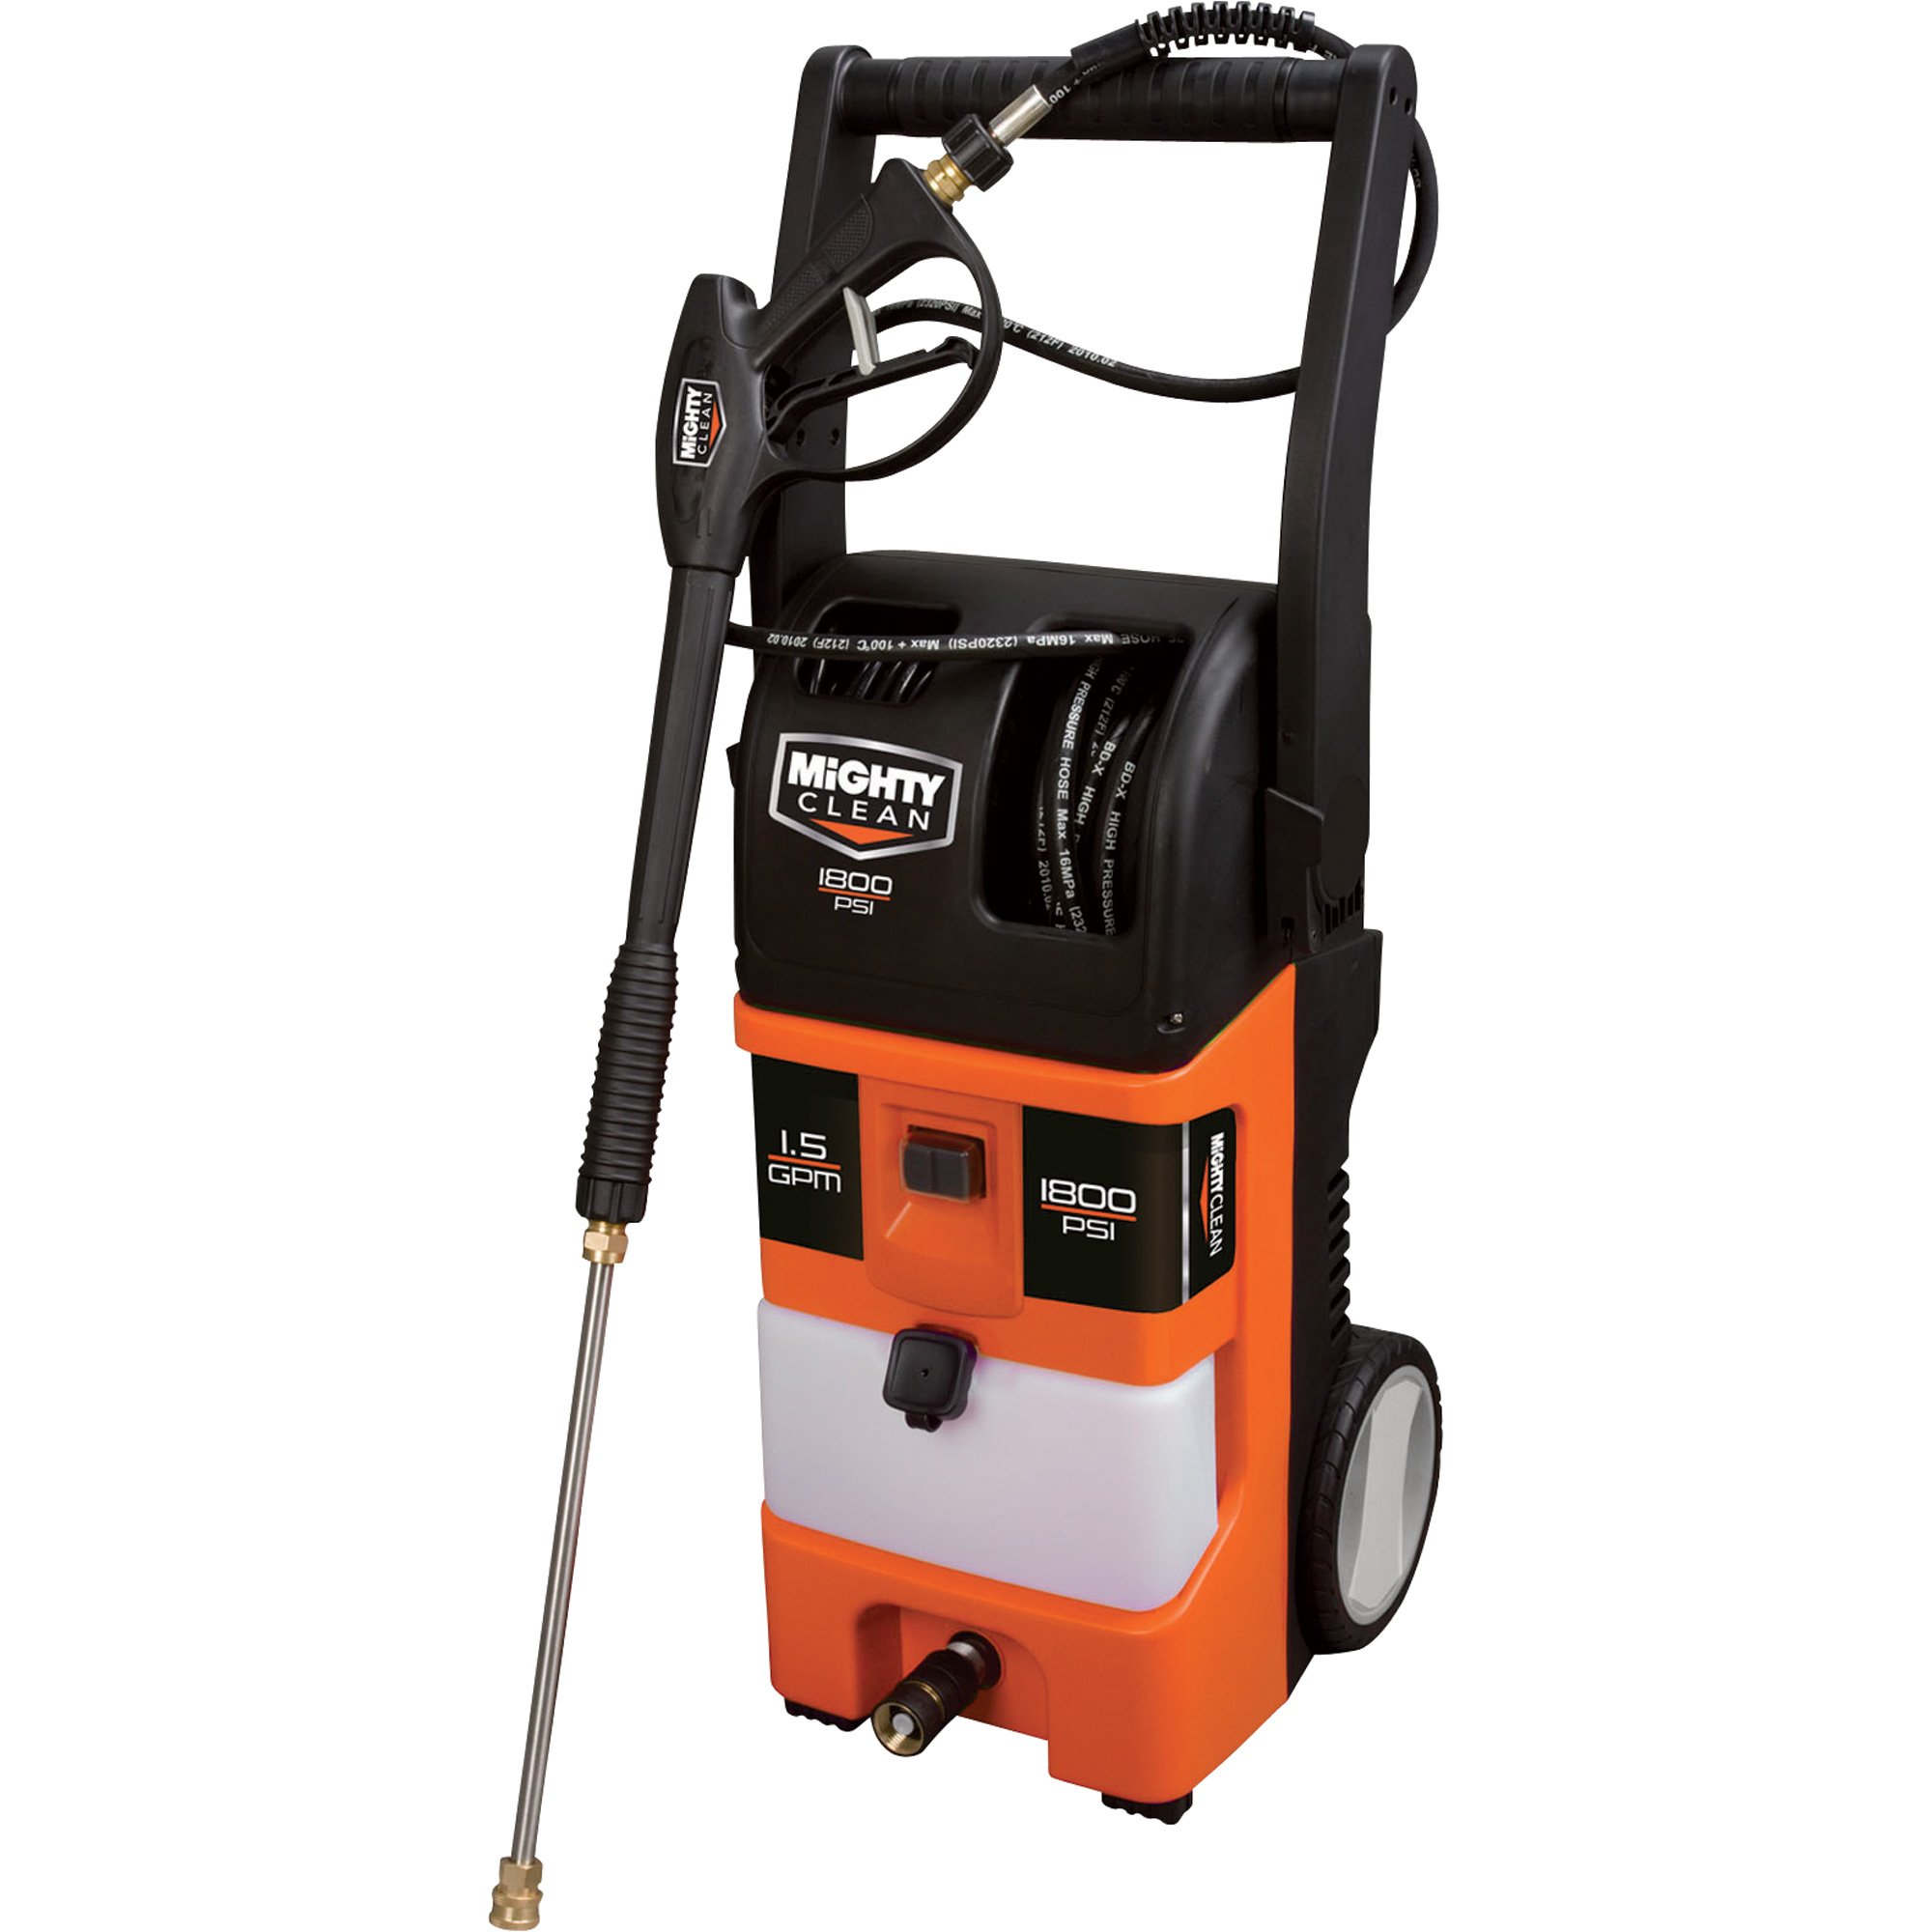 8 GPM, 1800 PSI, Electric Cold Water Pressure Washer